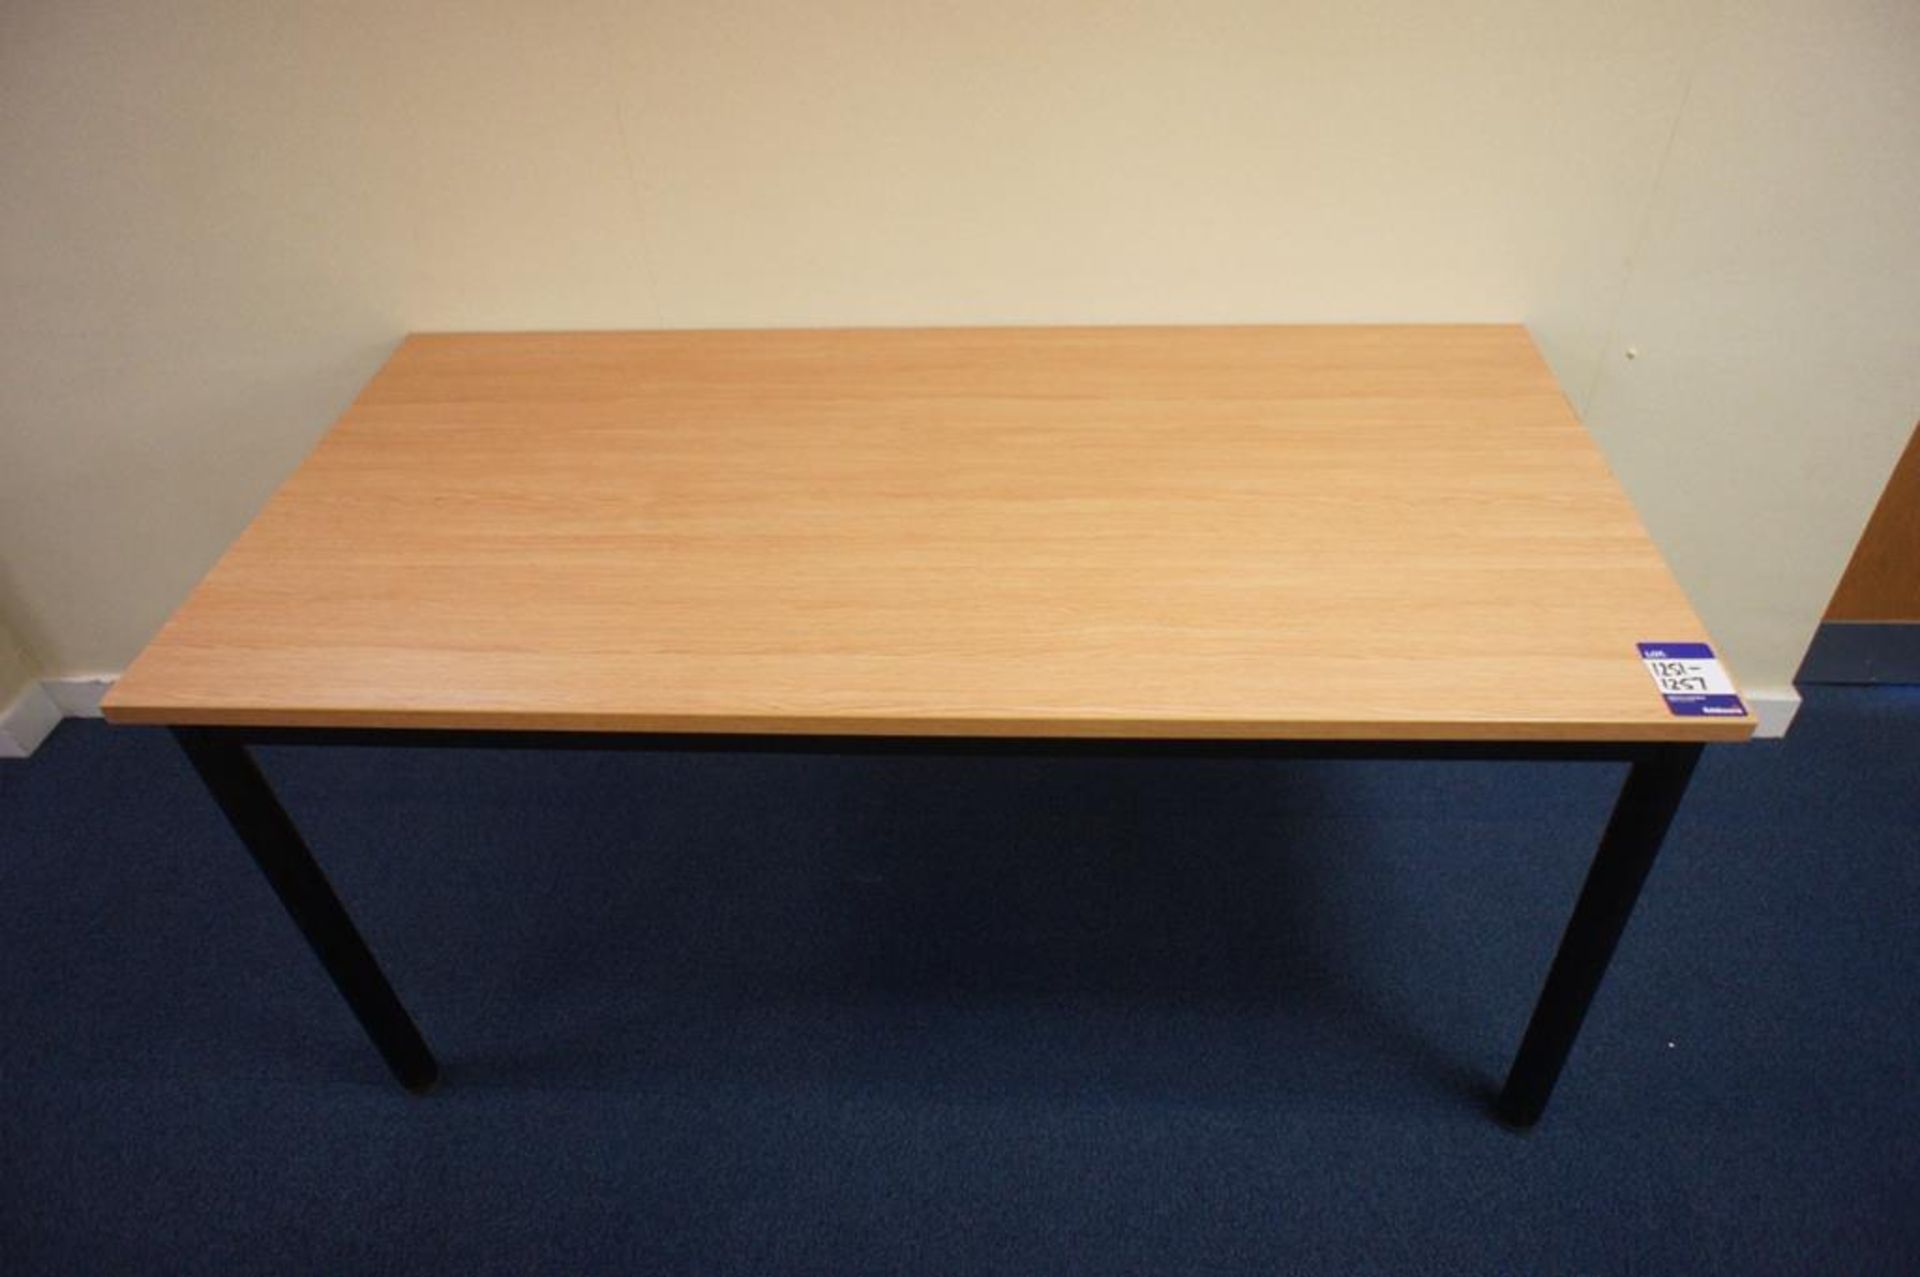 * Oak Effect Office Table 1500 x 750 Photographs are provided for example purposes only and do not